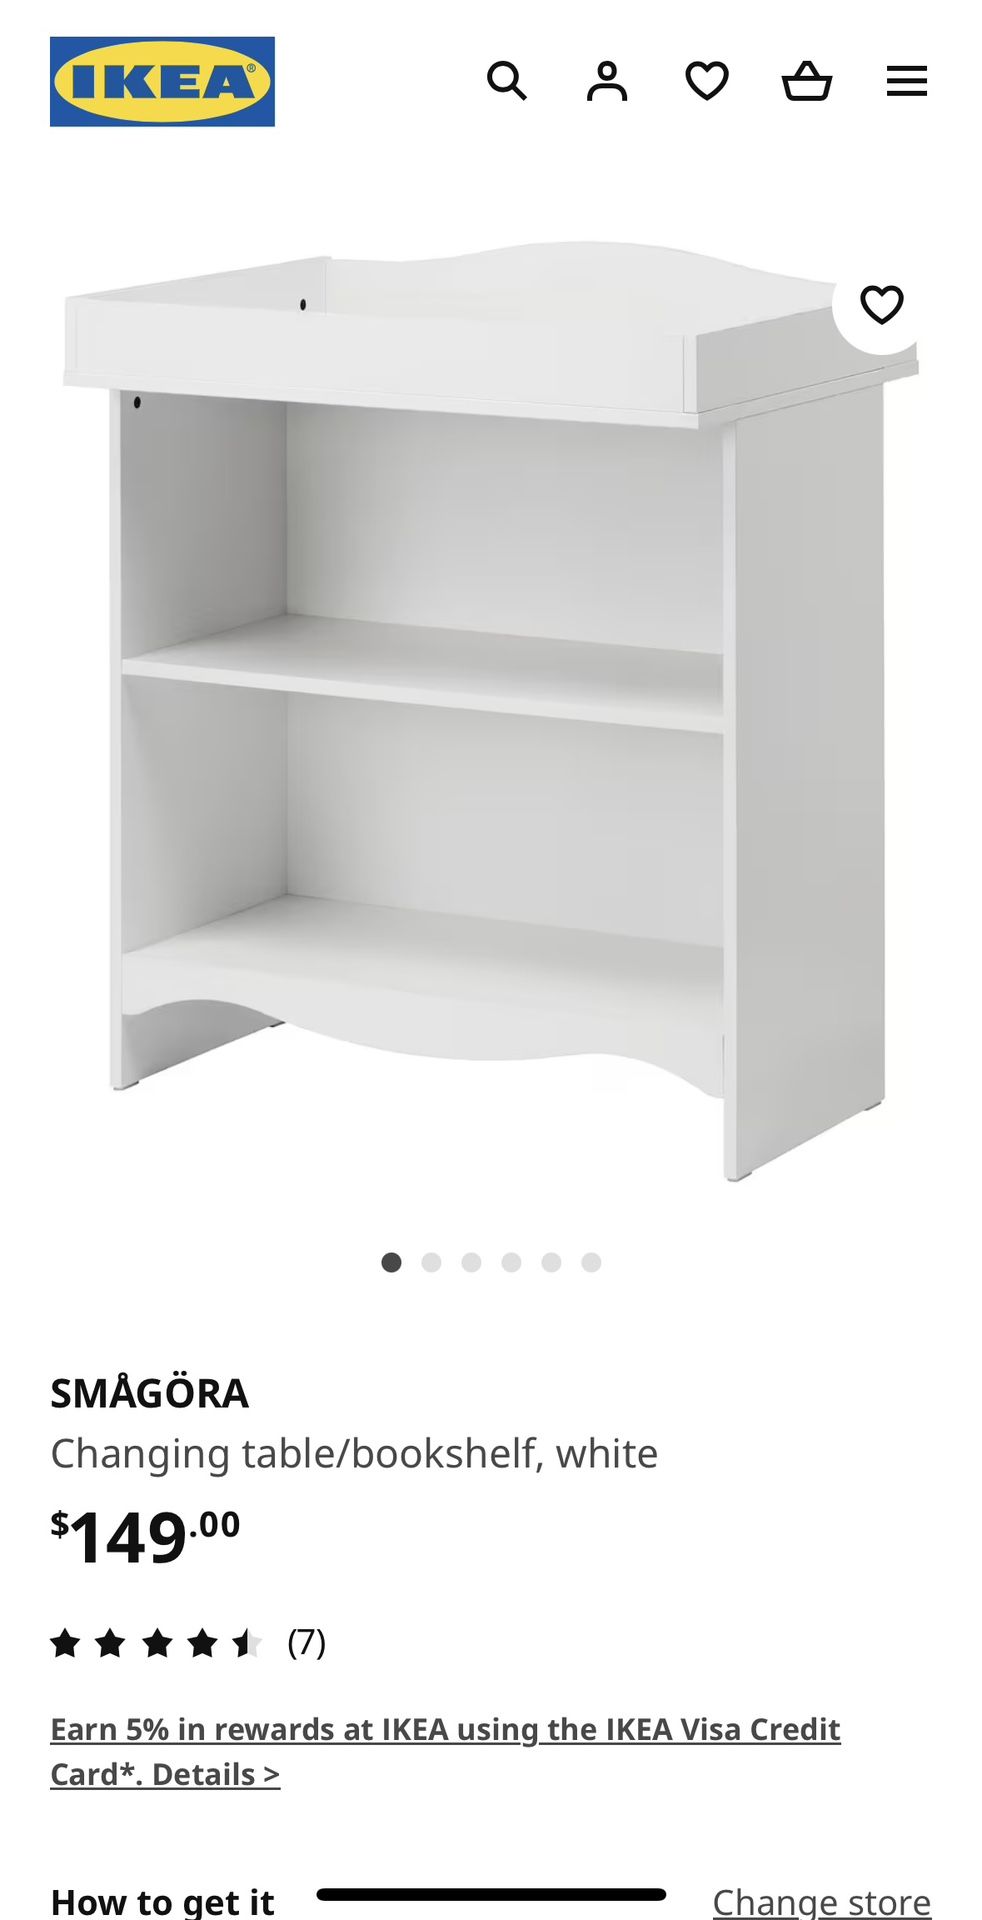 Changing Table / Book Case IKEA Smagora